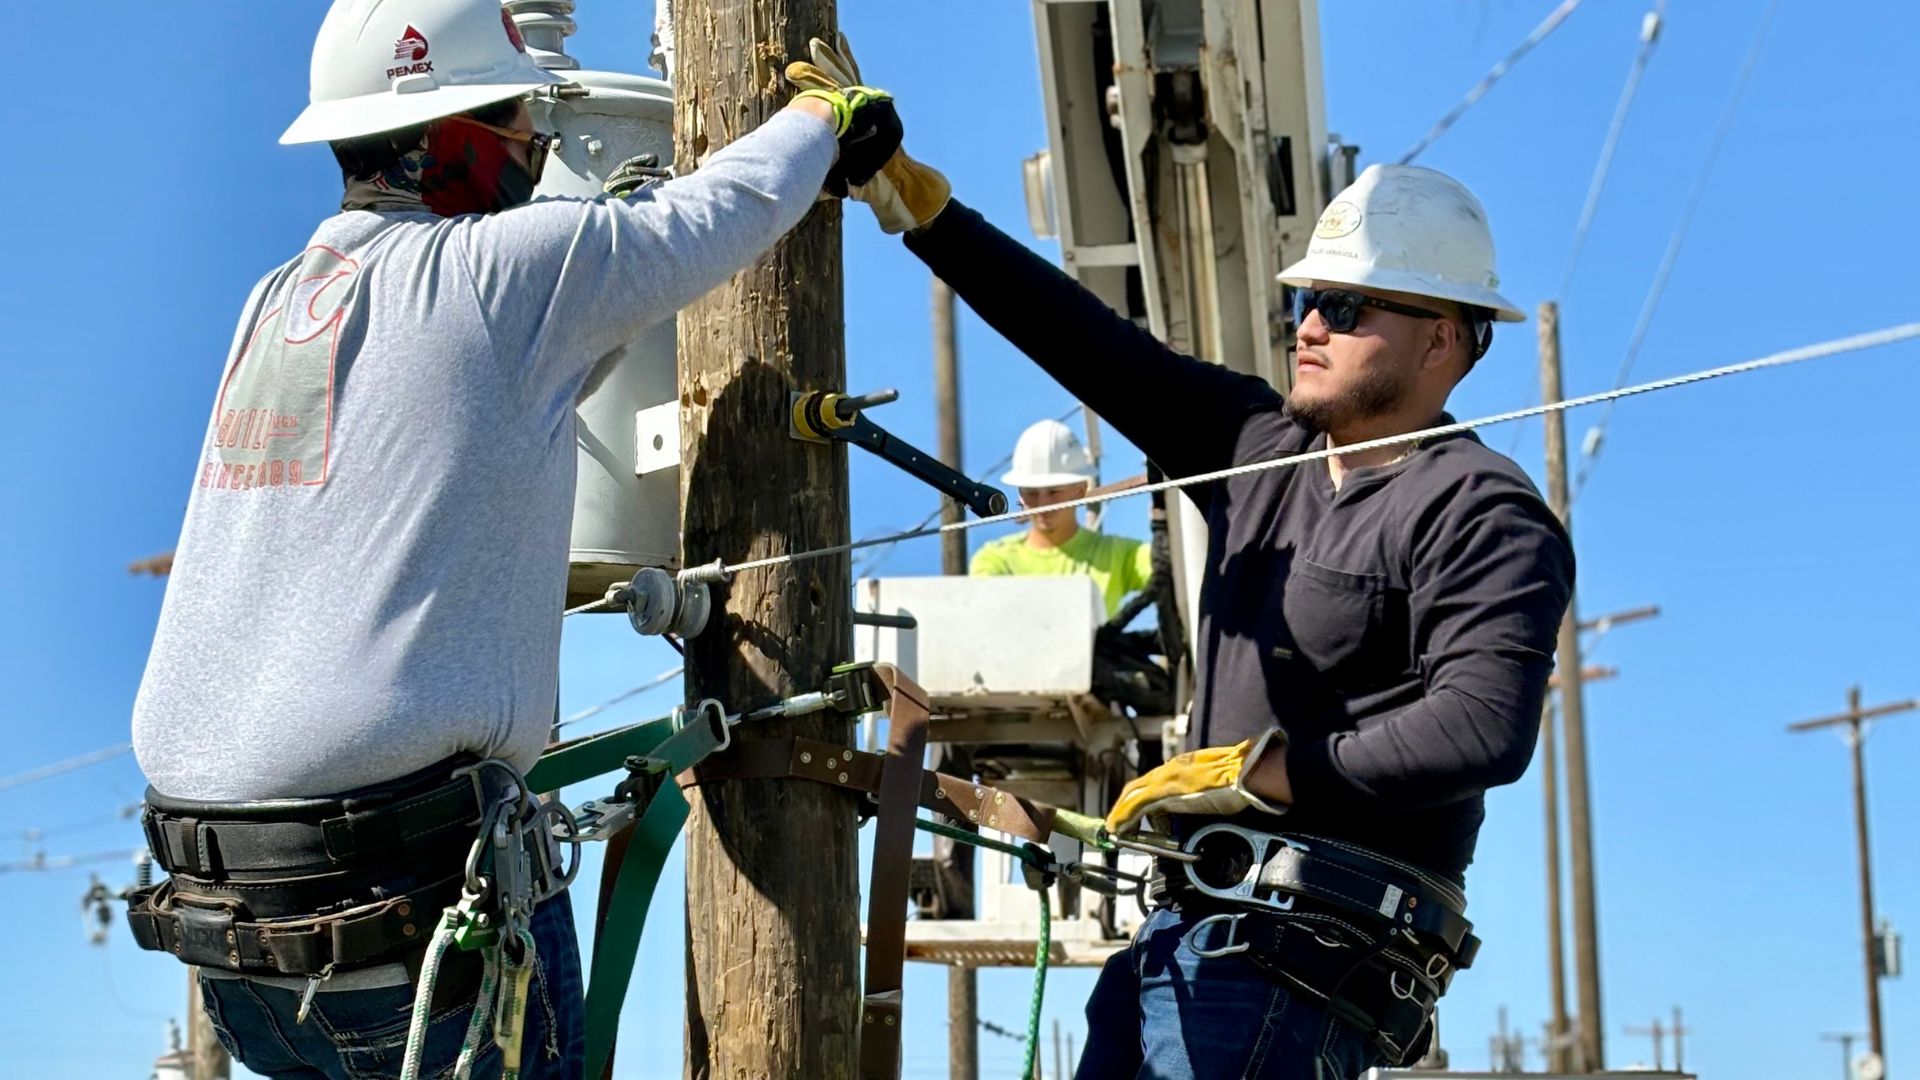 TSTC Electrical Lineworker student thankful for skills acquired for future job